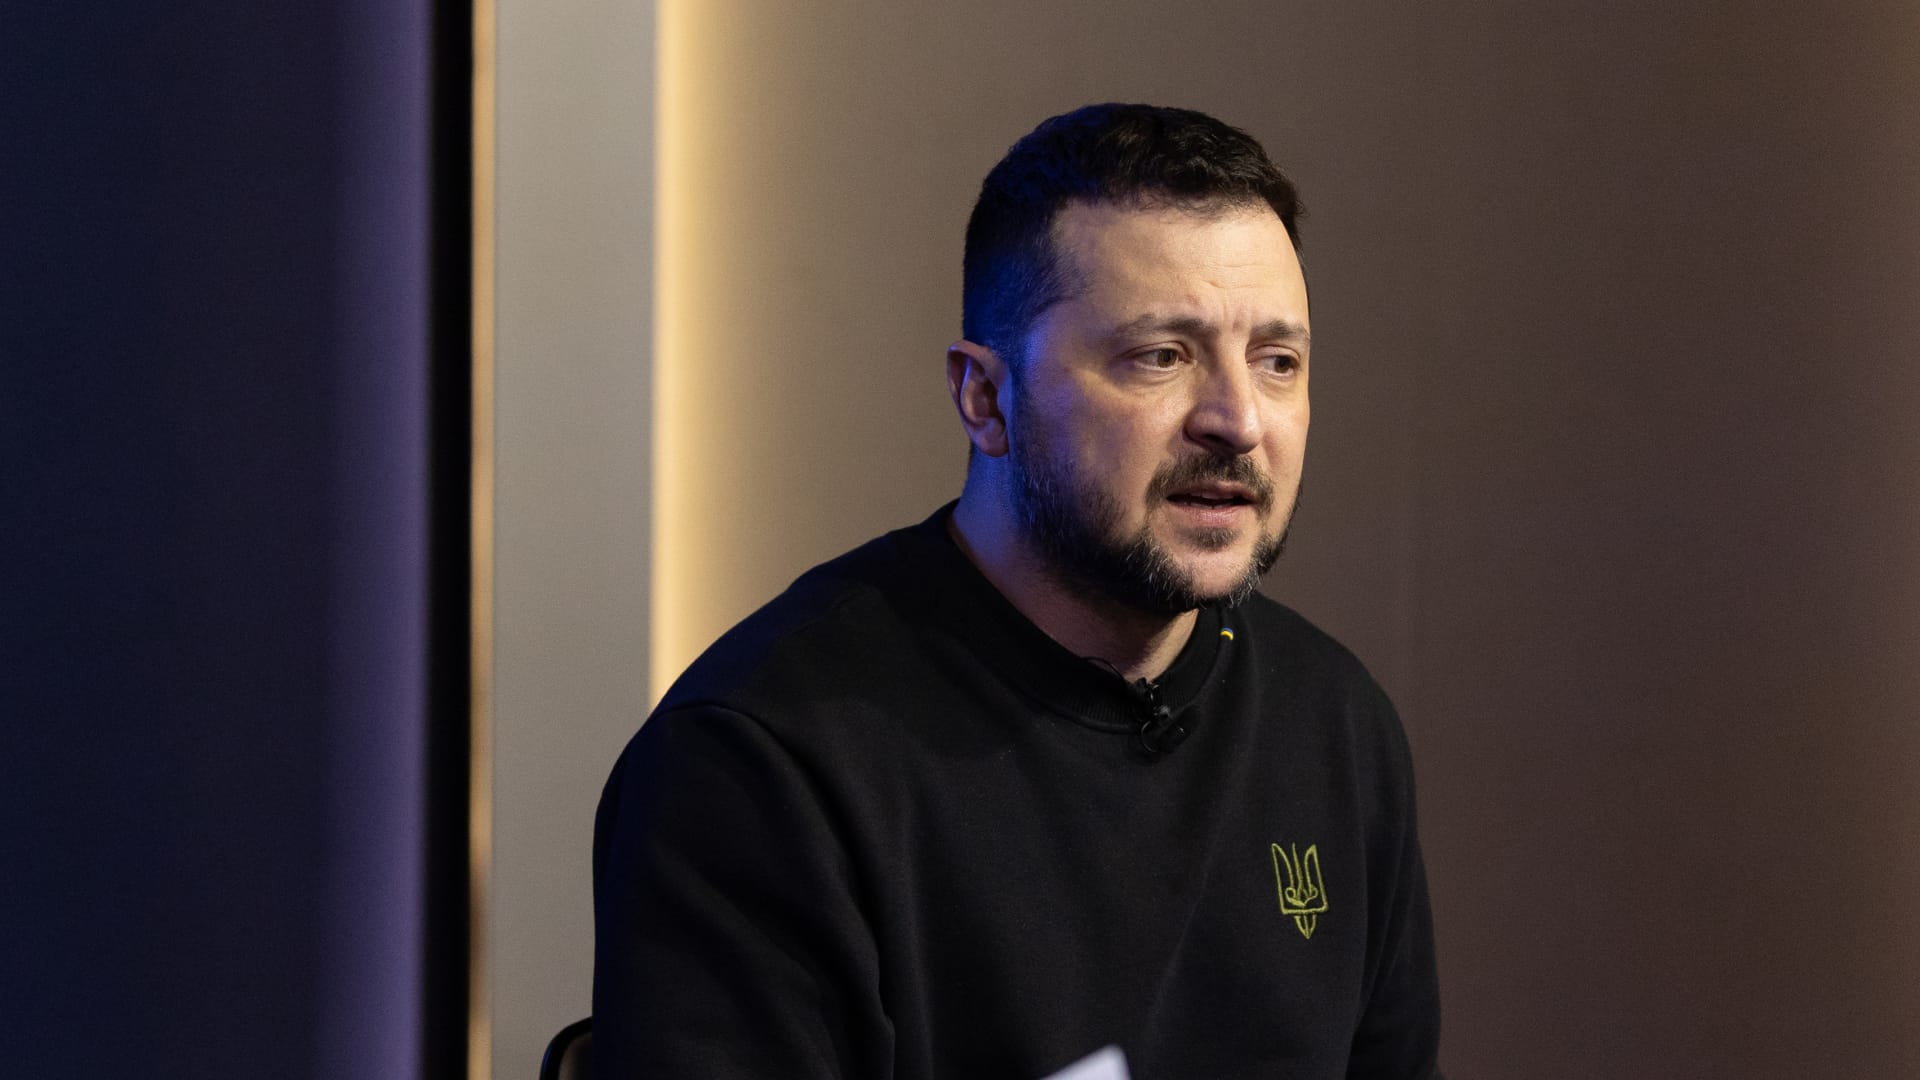 Zelenskyy's income fell drastically following Russia's invasion, new declaration reveals